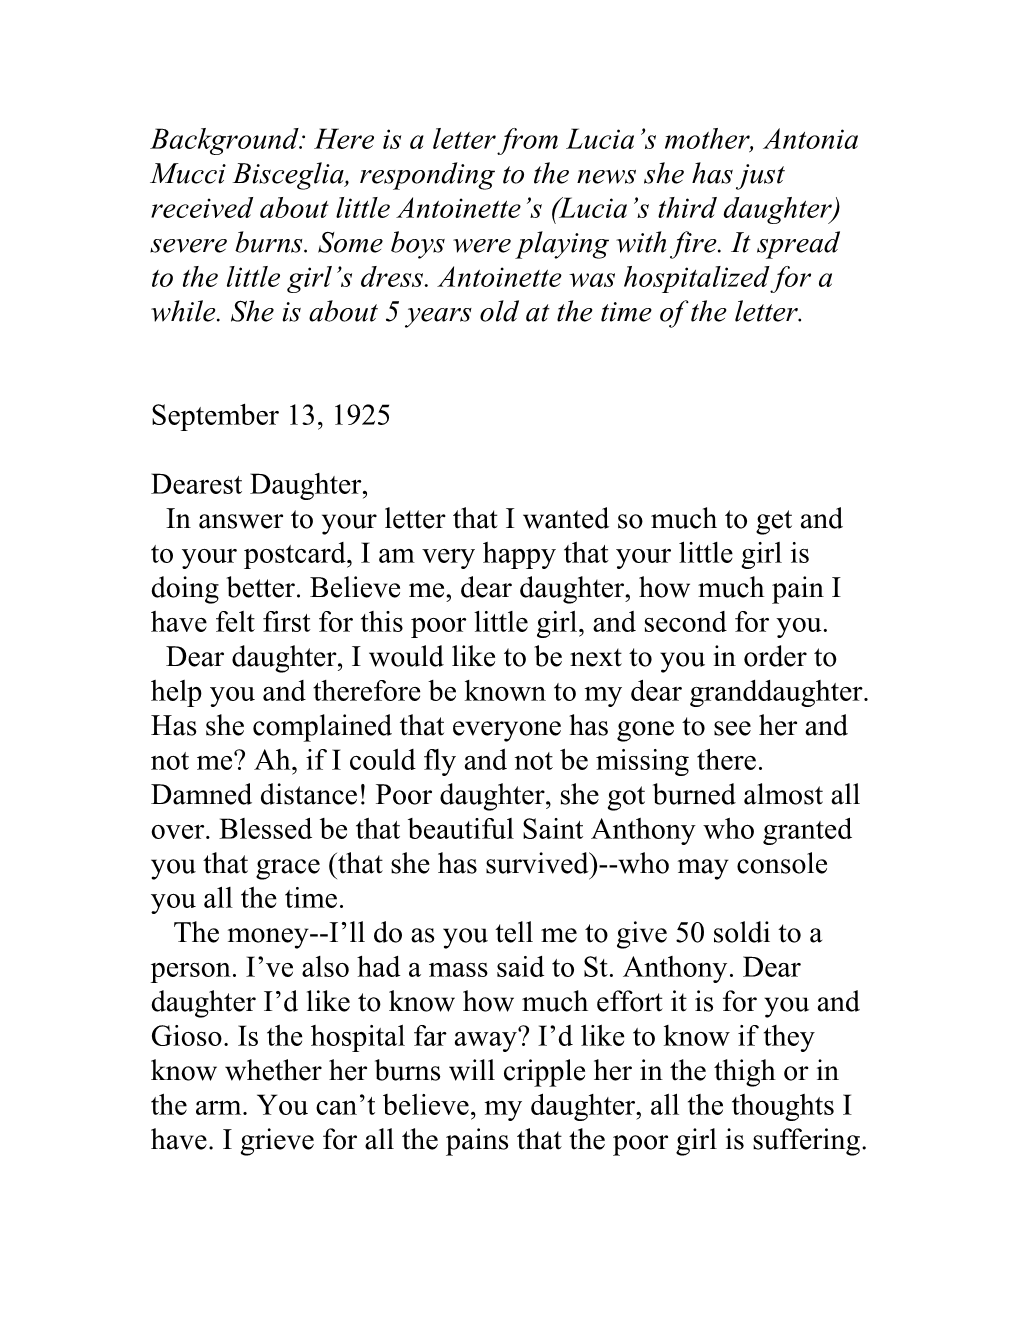 Background: Here Is a Letter from Lucia S Mother, Antonia Mucci Bisceglia, Responding To